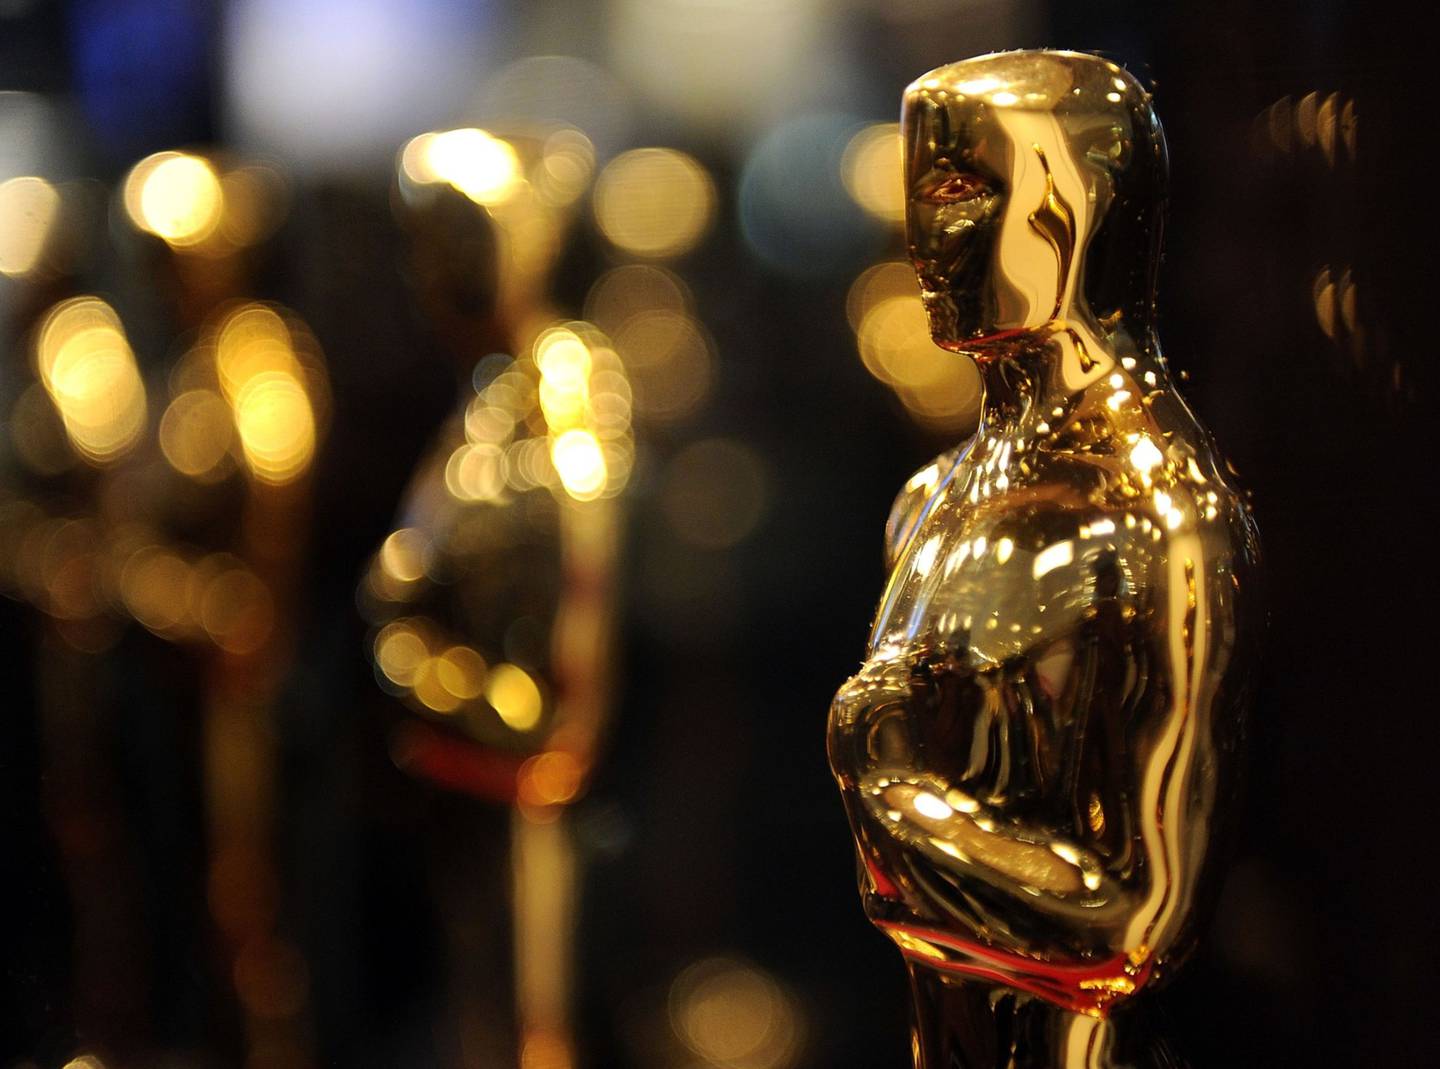 Oscar statues on display at "Meet the Oscars". Photographer: Andrew H. Walker/Getty Images North America